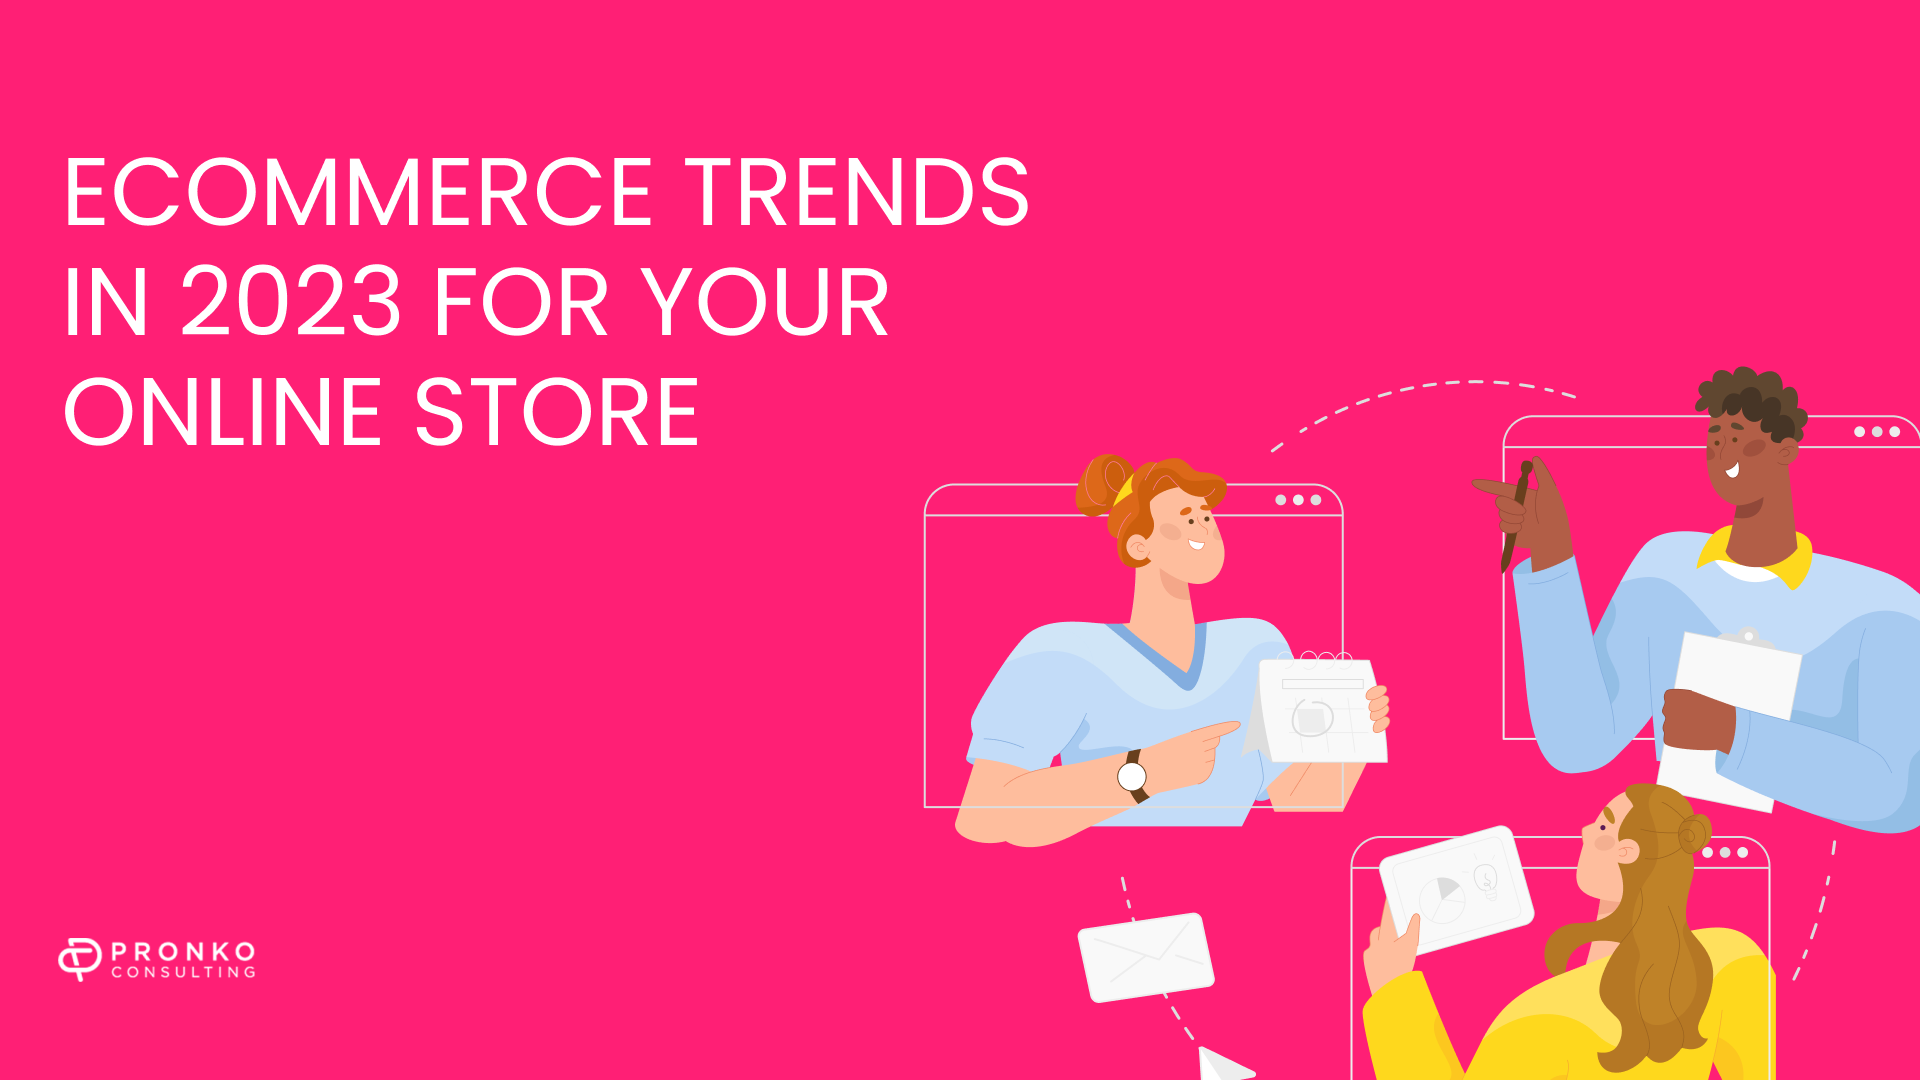 6 eCommerce trends which will boost your sales